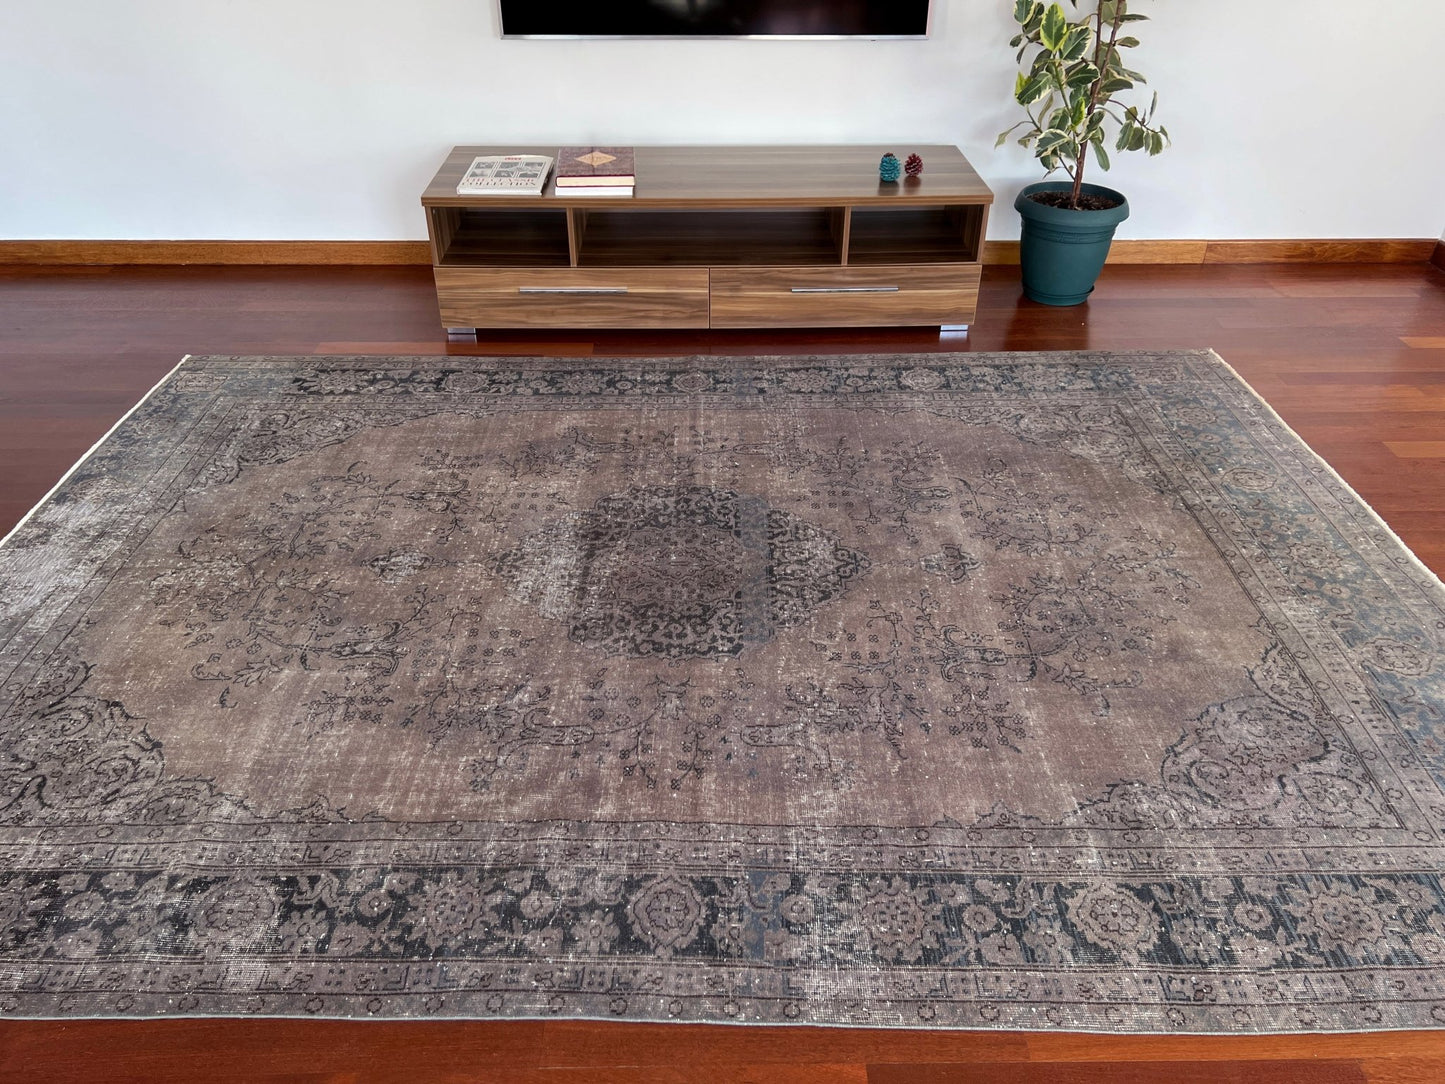 Affordable handmade modern rug san francisco bay area. Buy oriental rug online rug shopping free shipping to USA and Canada.